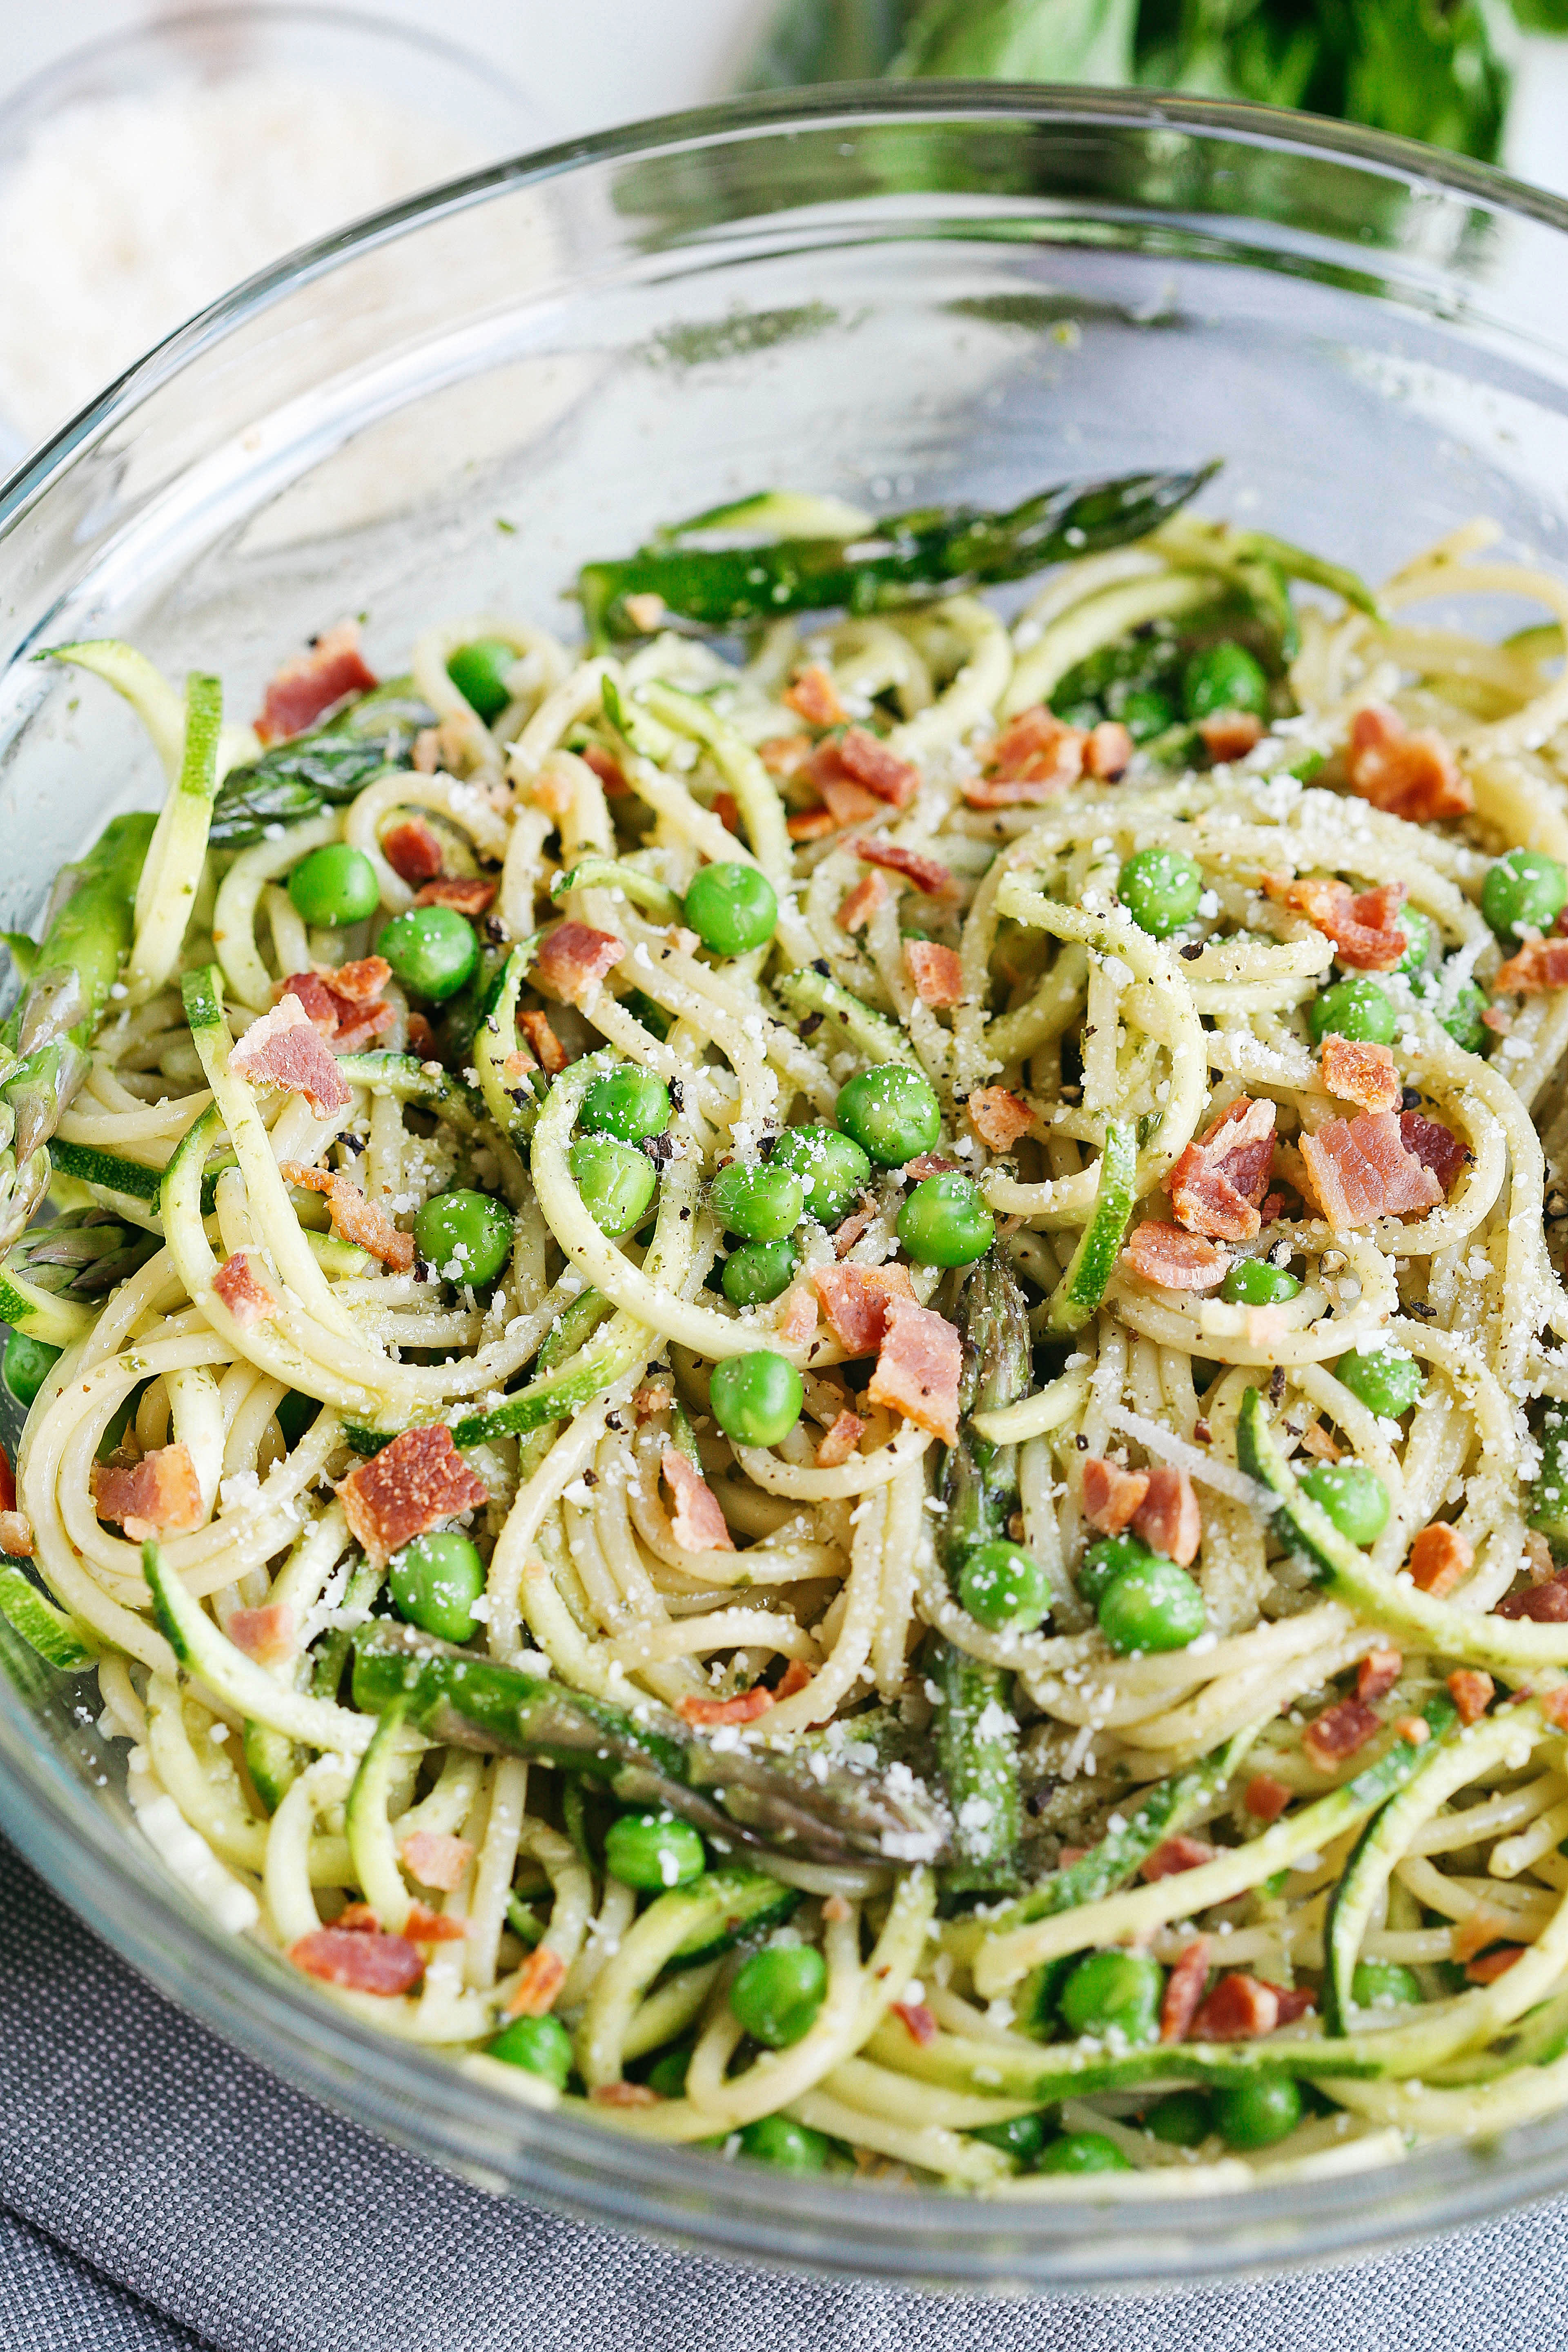 This delicious pasta salad is a lighter take on your favorite summer side dish that is loaded with fresh veggies and crunchy bacon all tossed together with a sweet basil vinaigrette for a meal that is both healthy and comfort food all in one!